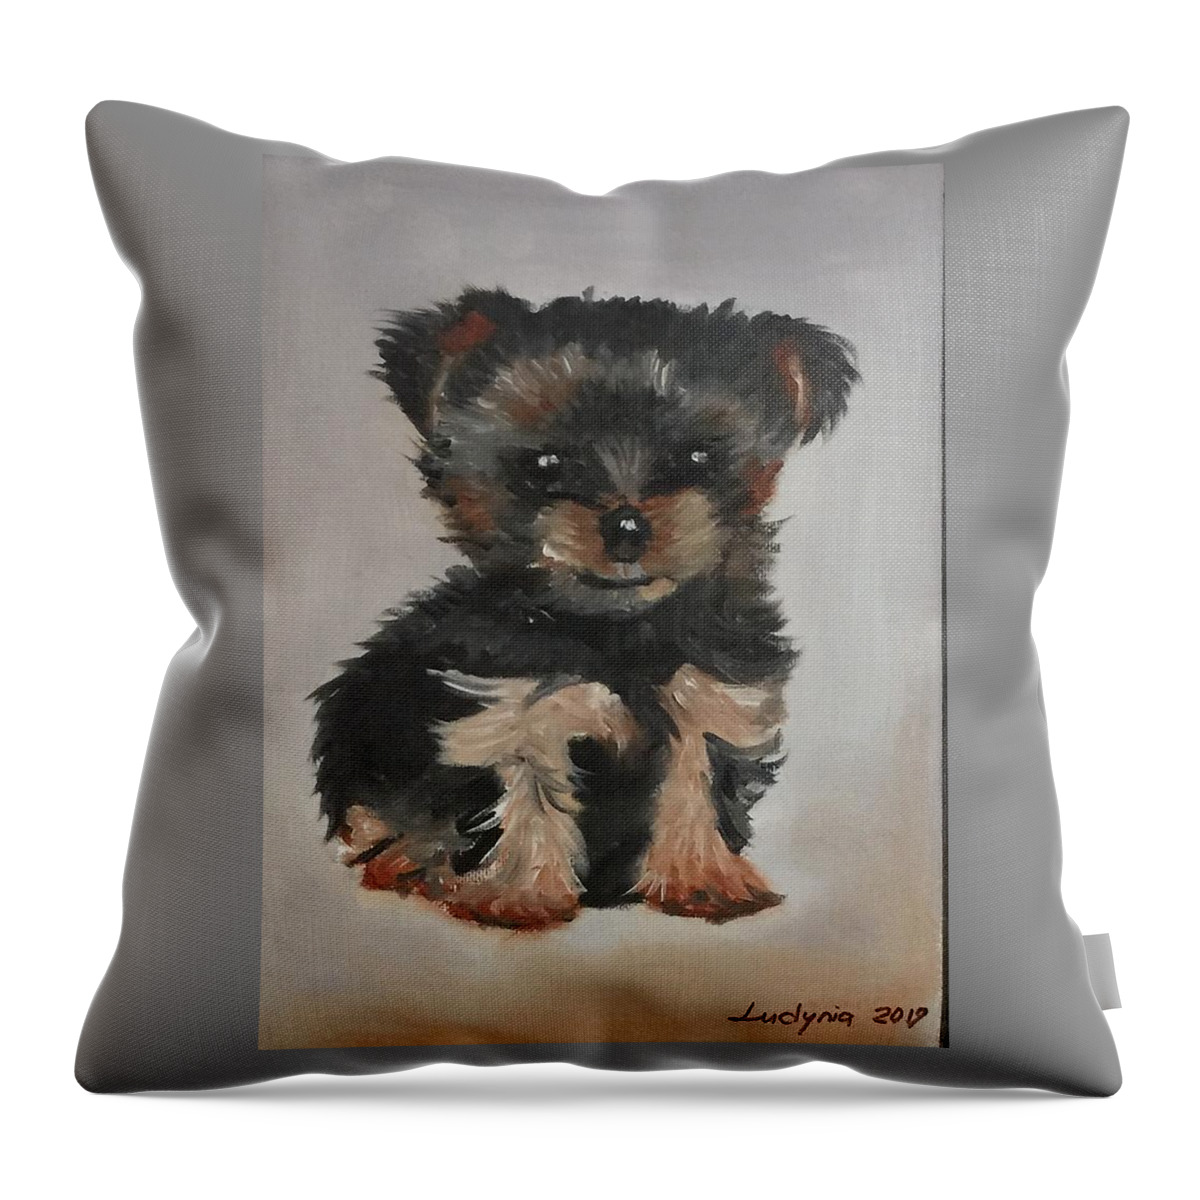 Puppy Throw Pillow featuring the painting Puppy F by Ryszard Ludynia